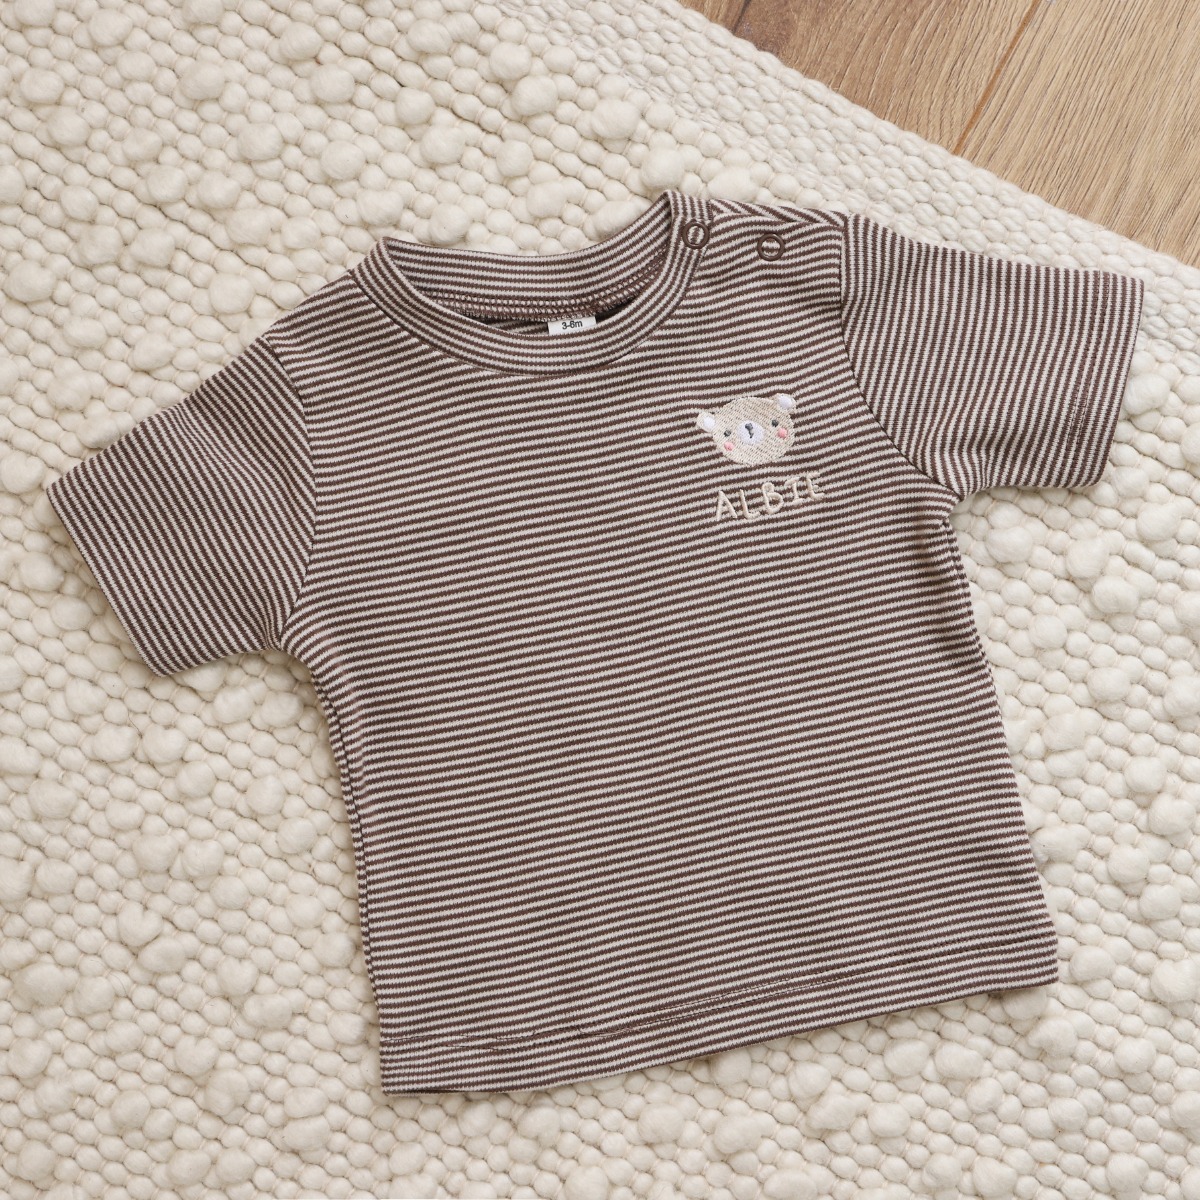 Personalised Bear Striped Top